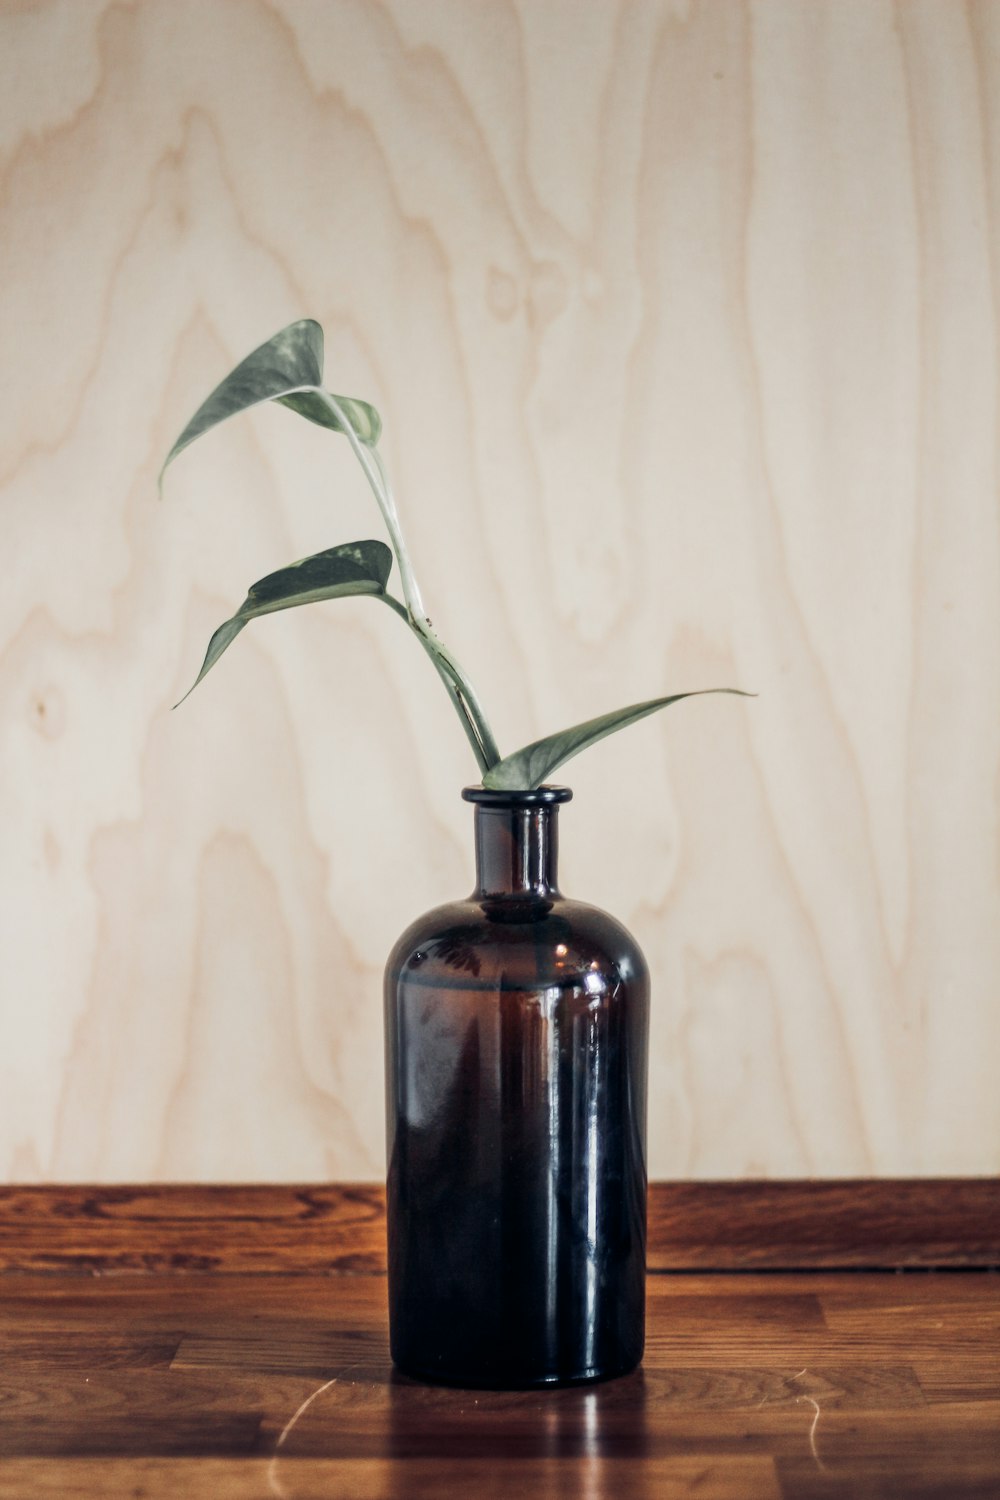 green leafed plant in amber glass bottle on brown wooden surface